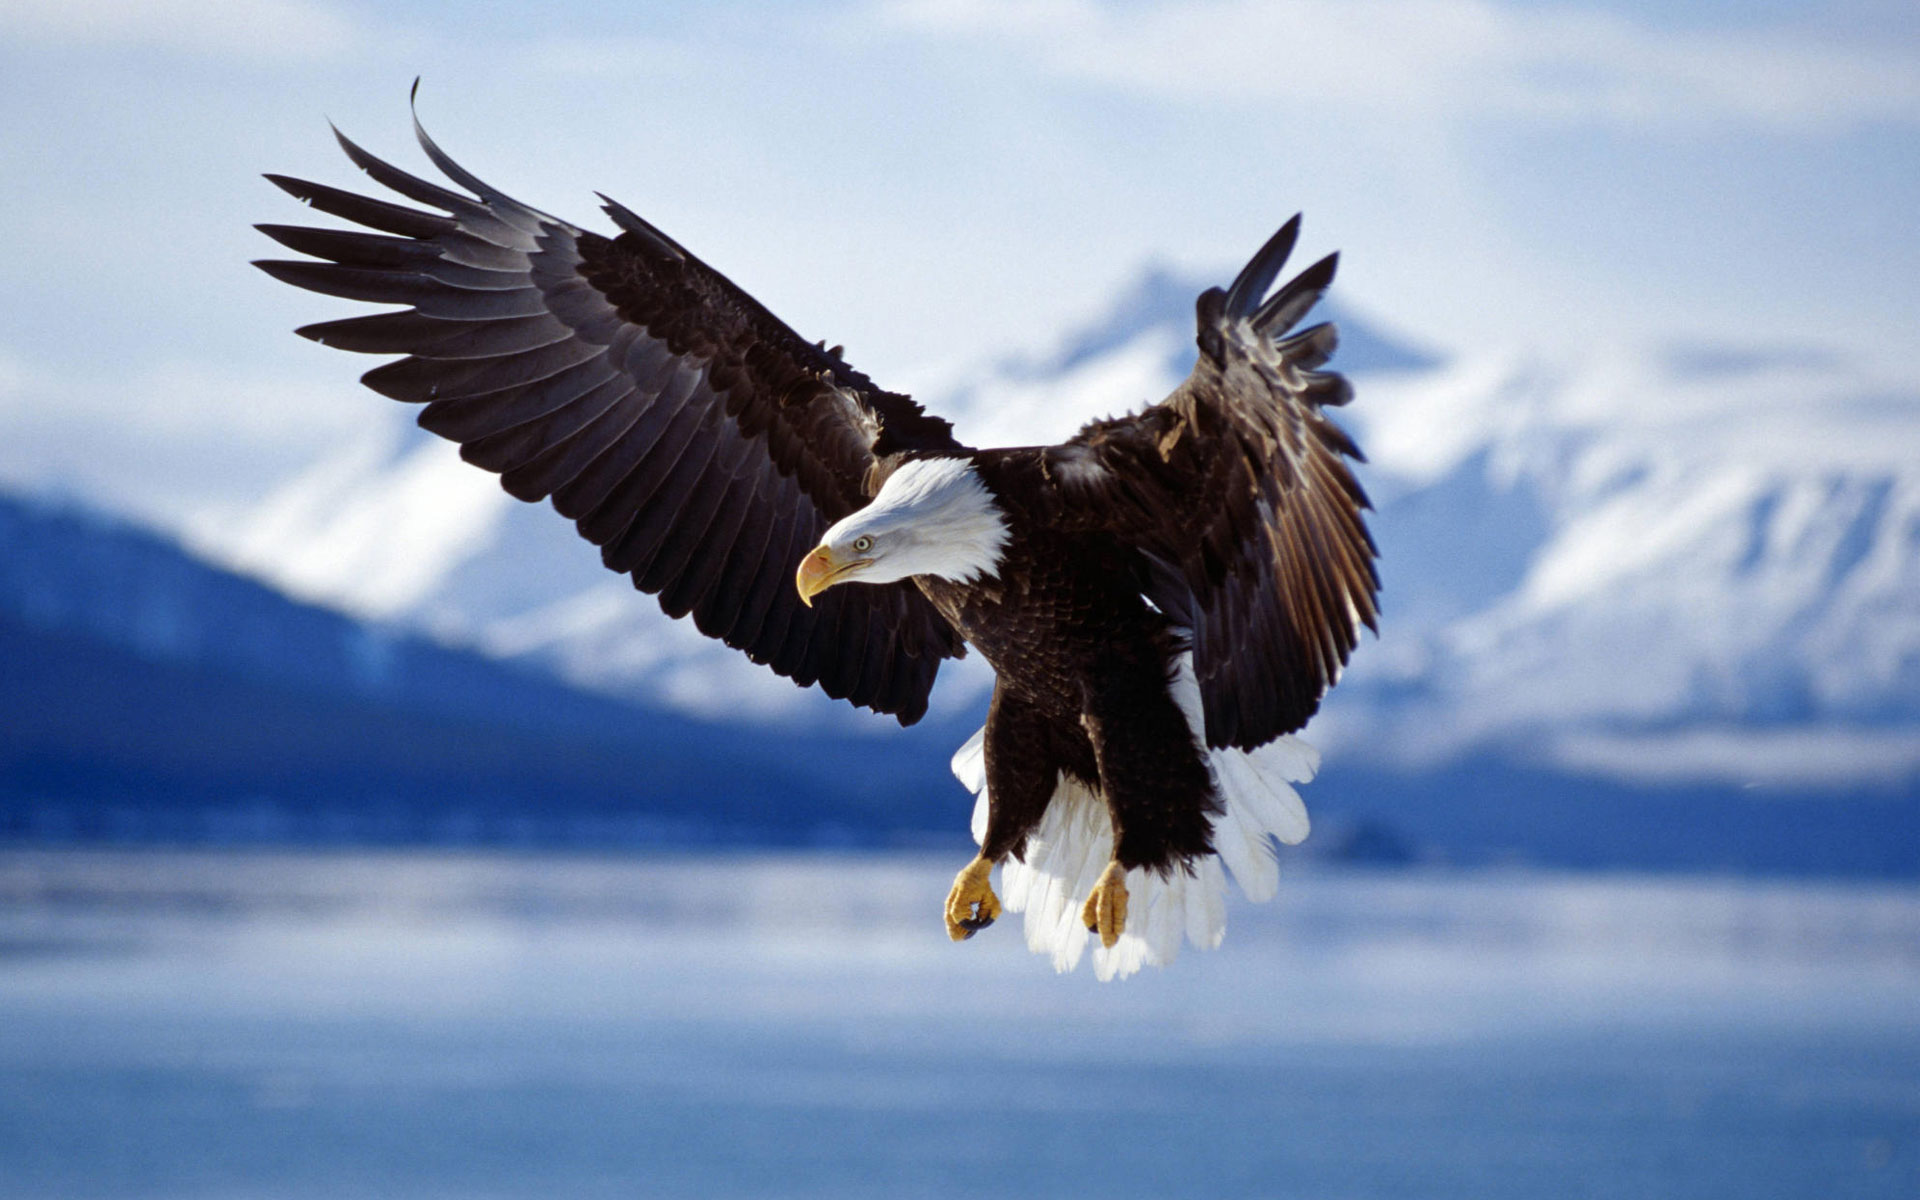 Eagle Hd Wallpaper 10171 Hd Wallpapers in Animals   Imagescicom